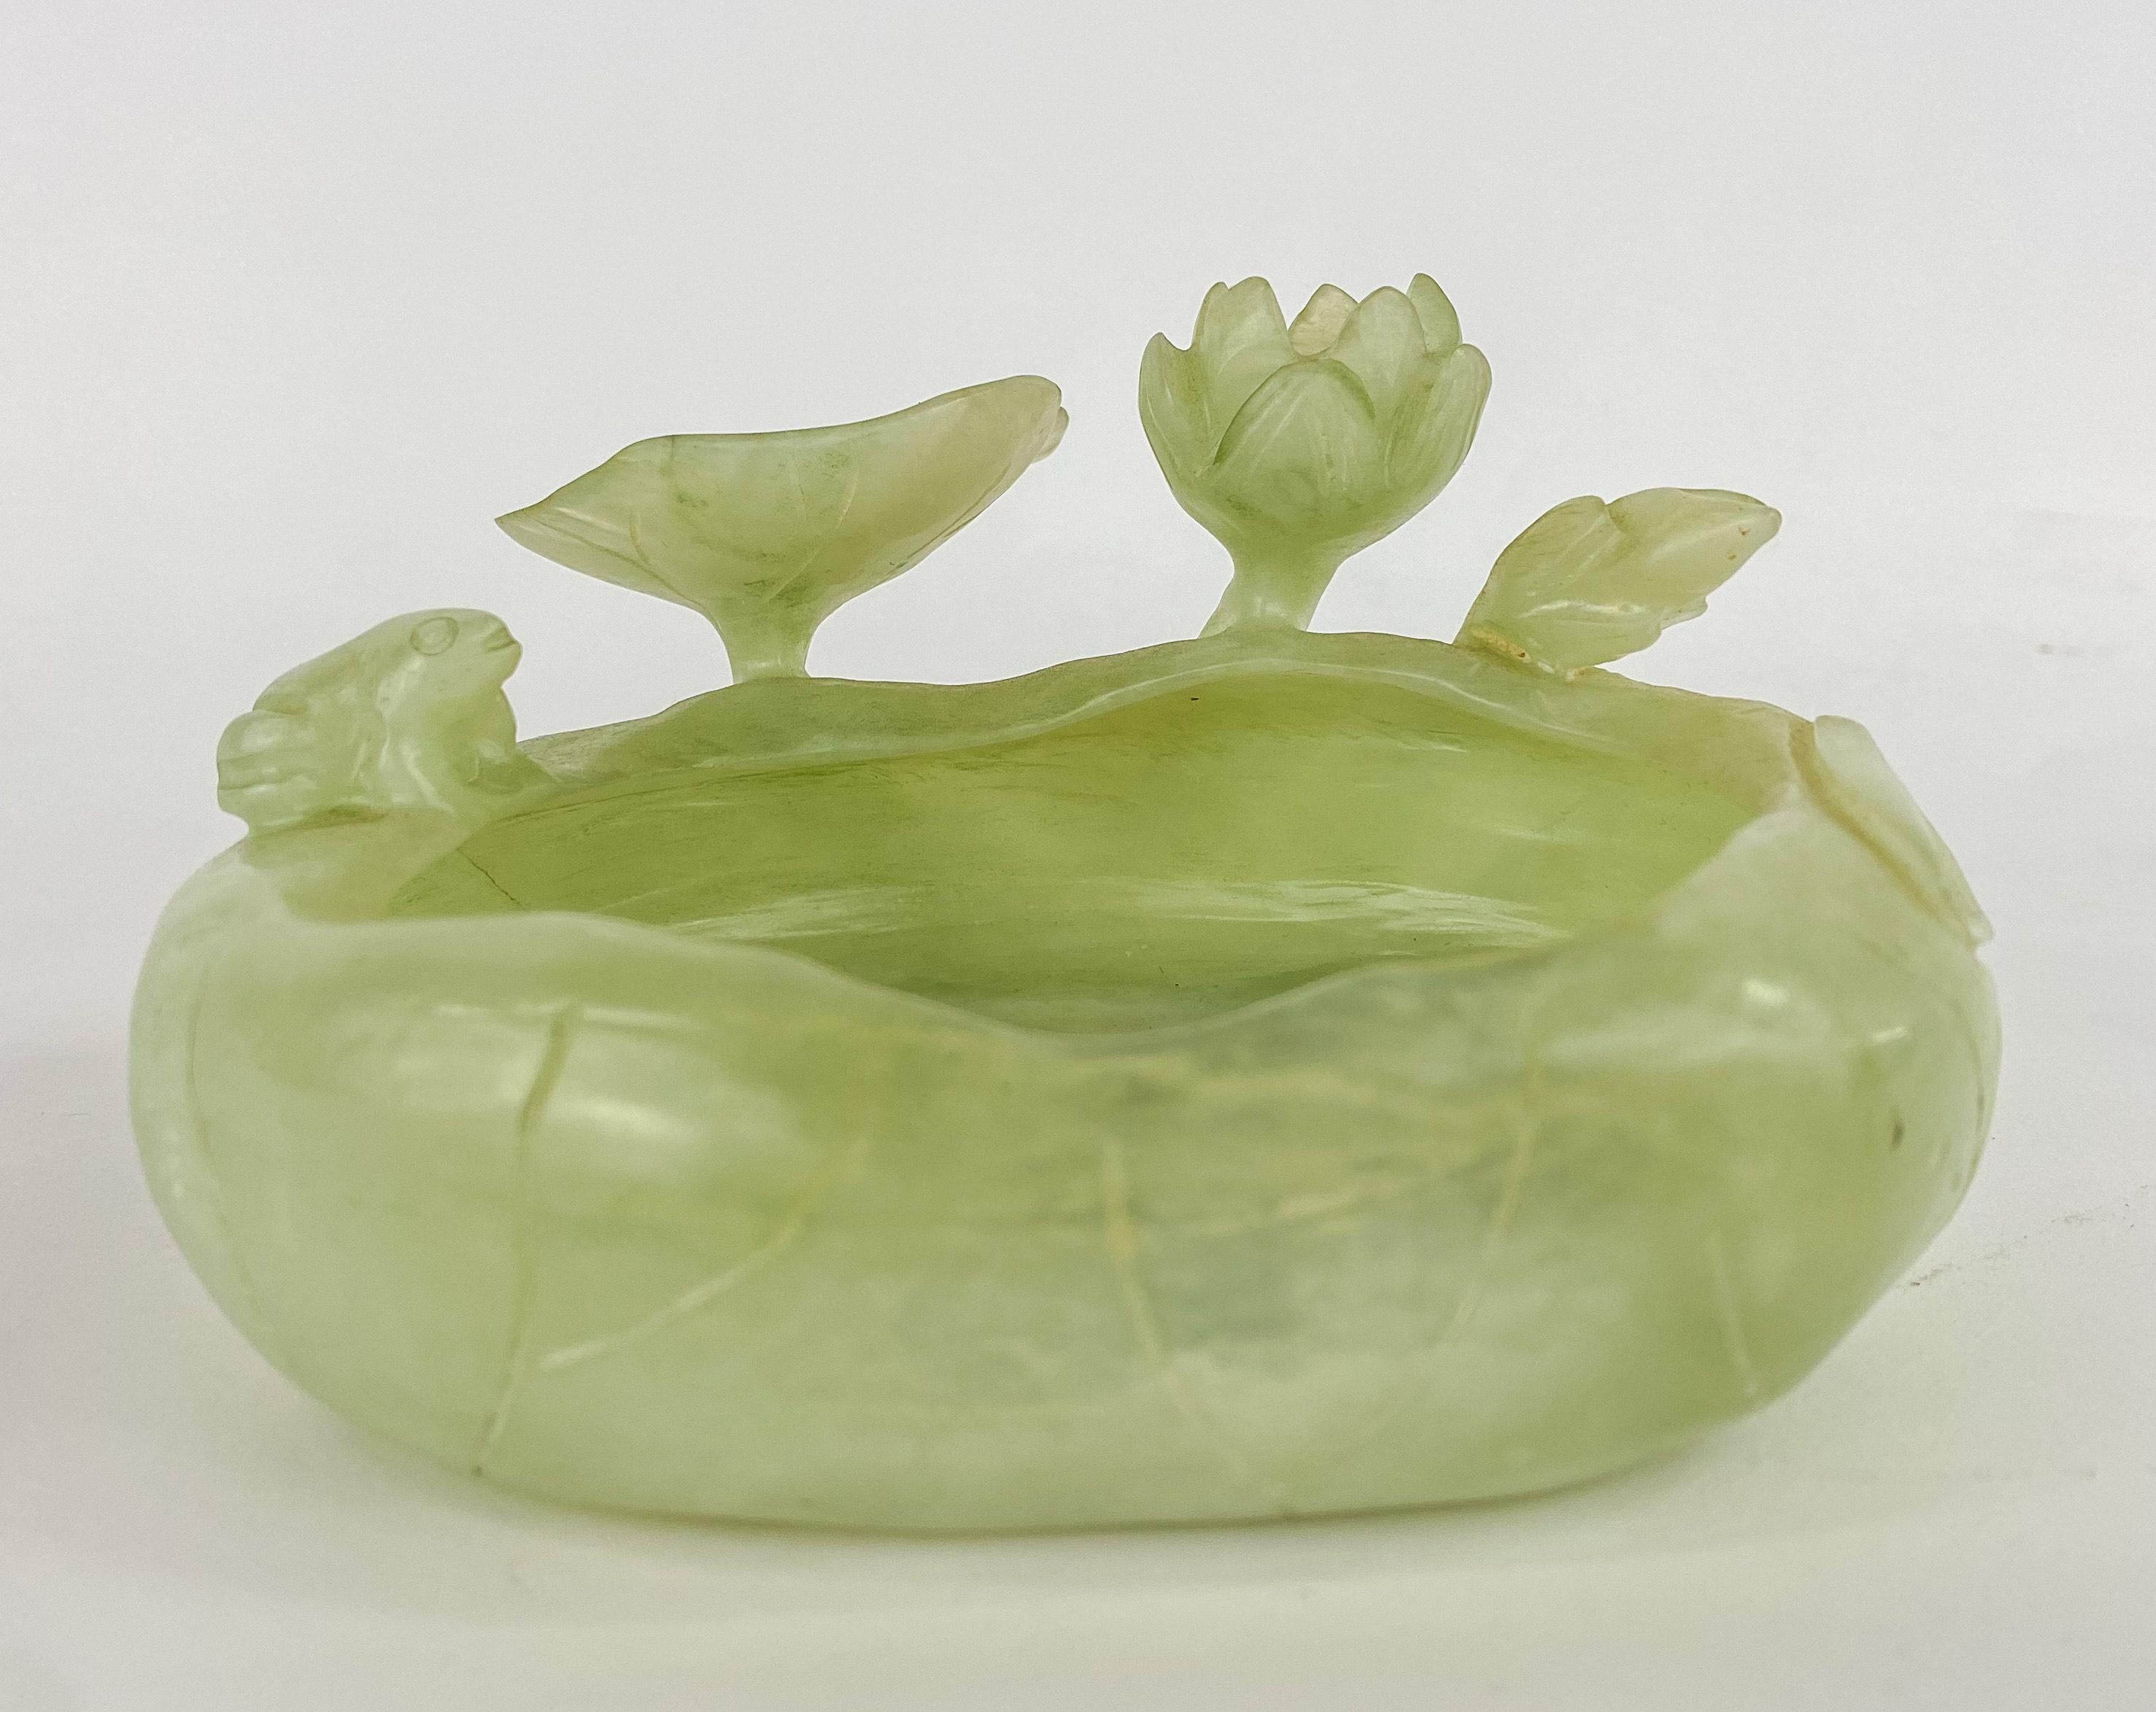 A rare mid century Chinese natural jade bowl. The beautiful green decorative bowl is finely carved and features amazing details of flourishing lotus flowers, one of the most common flowers in China, in different stages. 
This decorative jade bowl